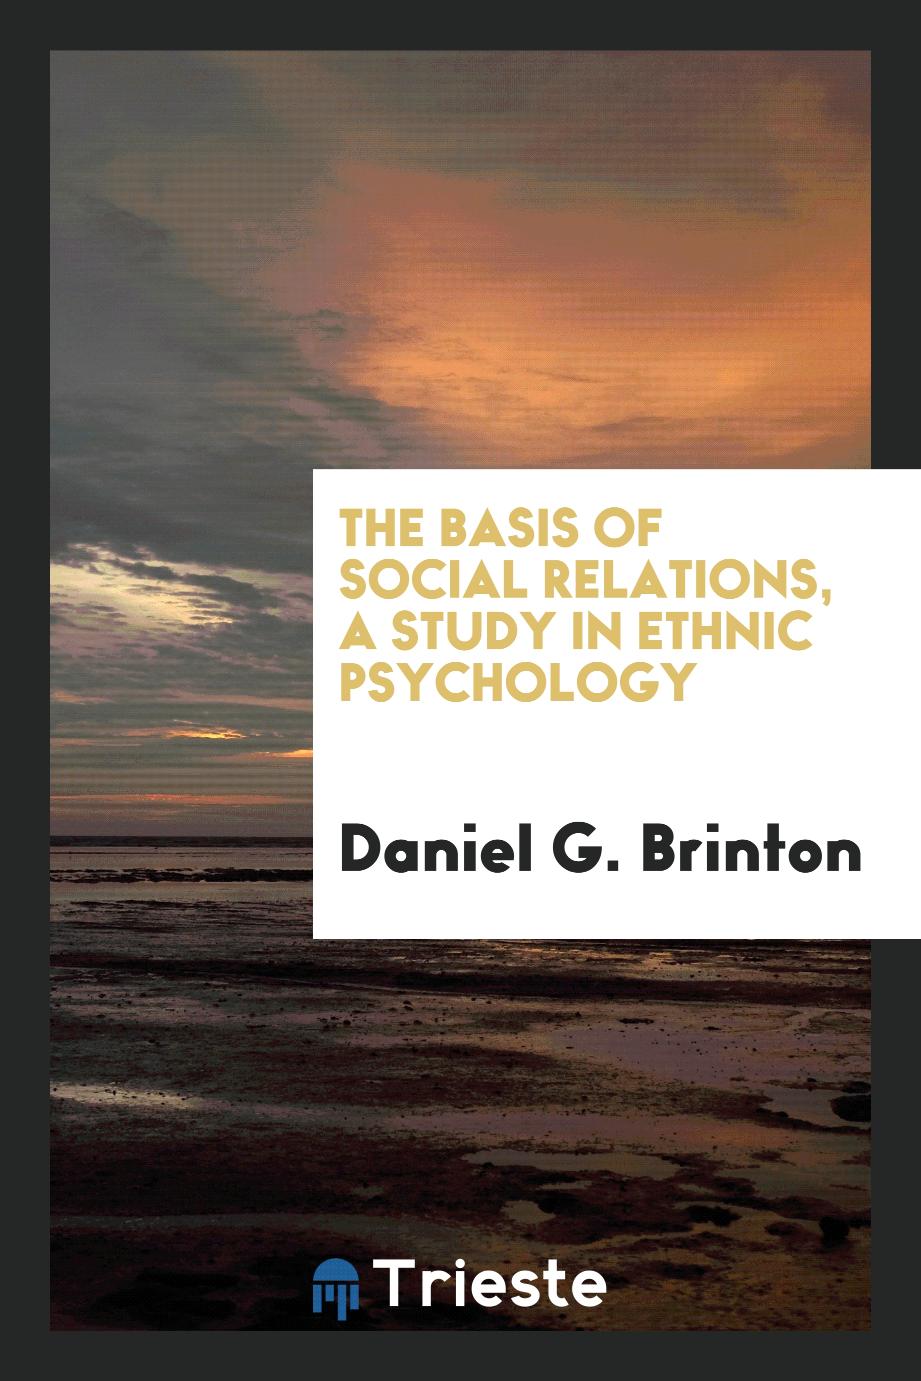 The basis of social relations, a study in ethnic psychology